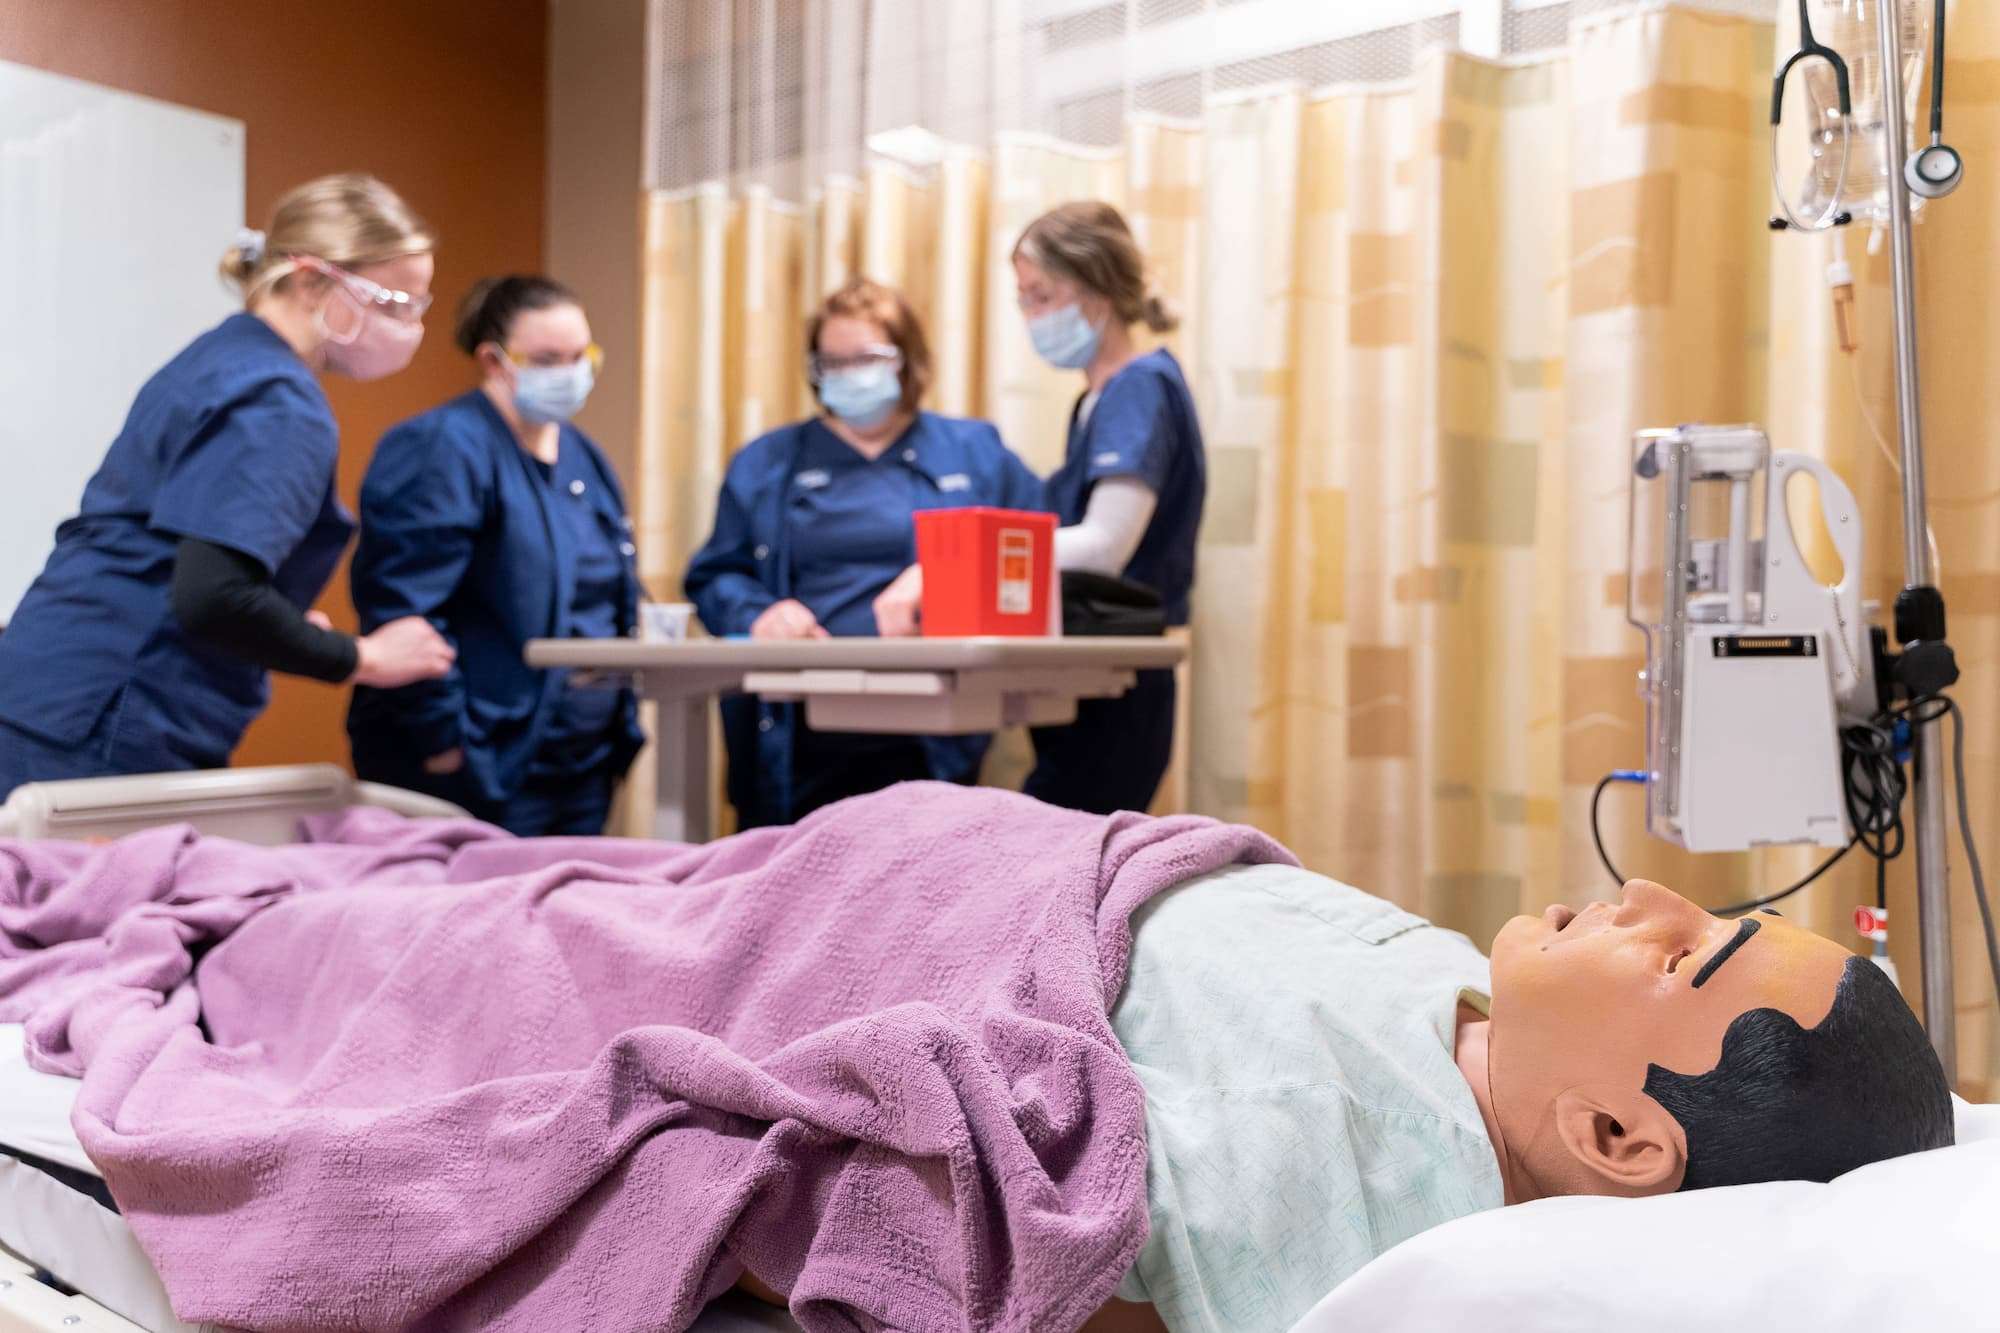 A close-up shows a mannequin in stasis as nursing students across the room discuss treatment.